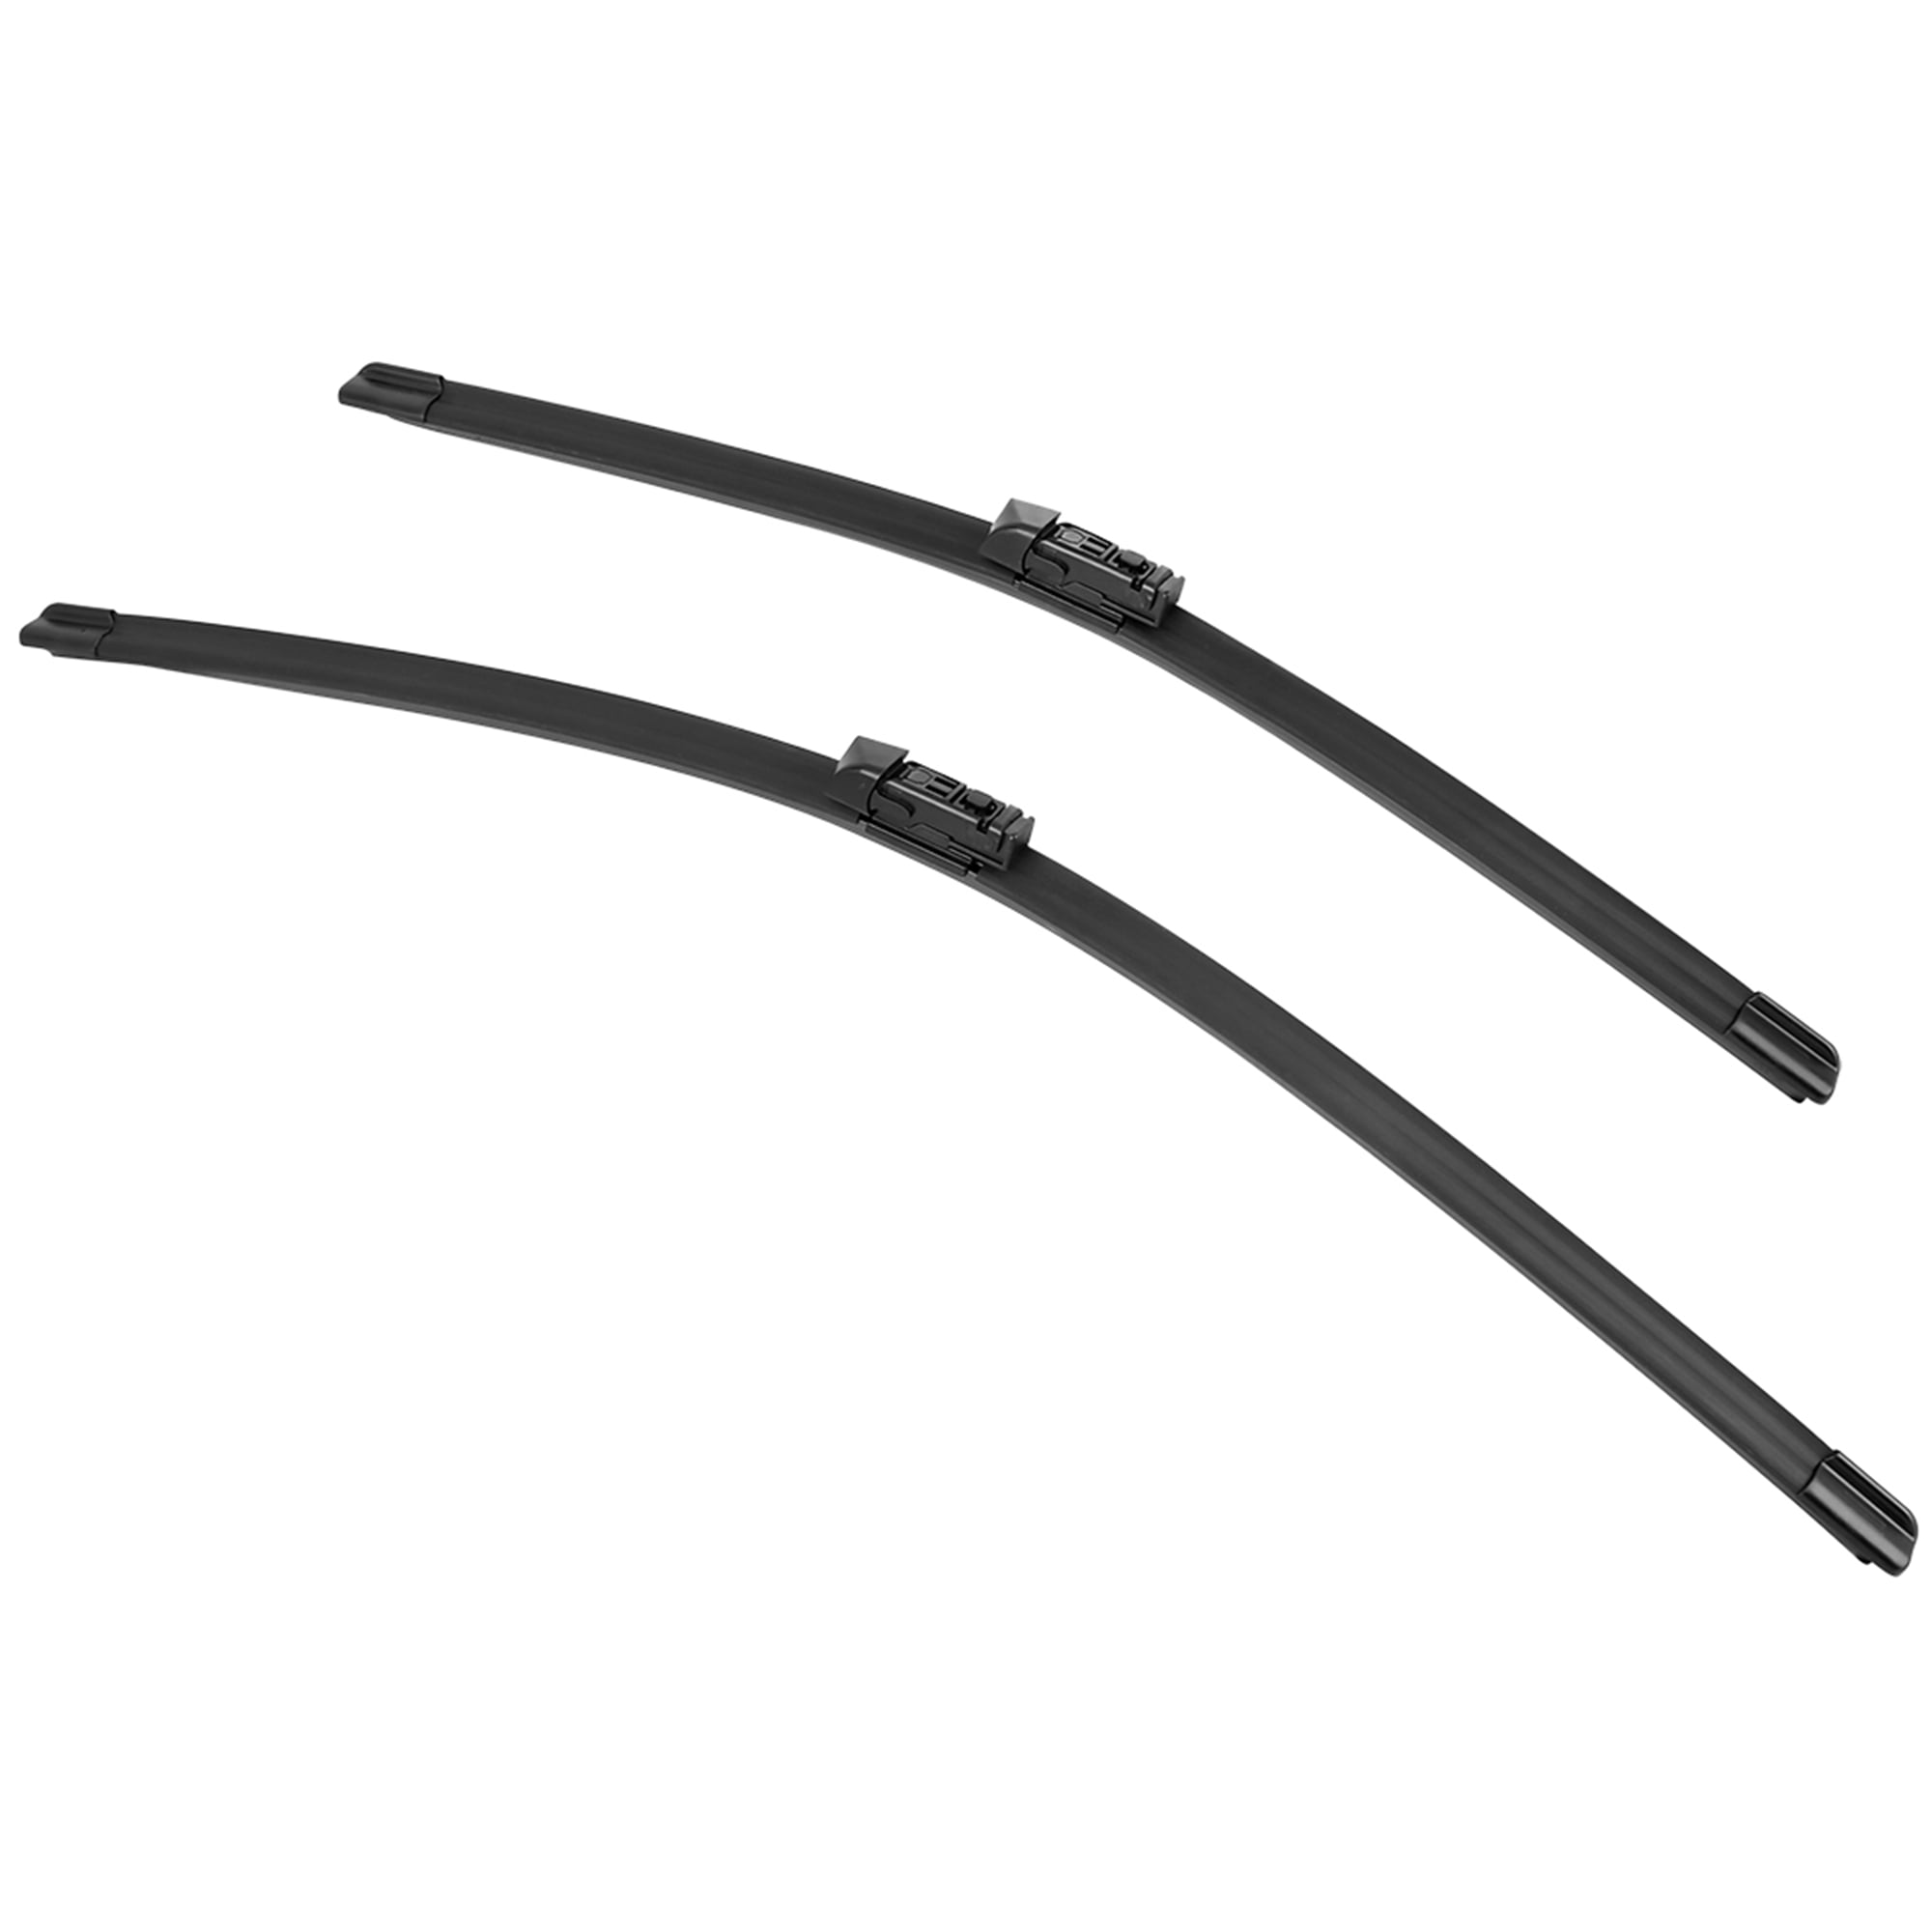 24/18 Top Lock 2 wipers Factory For Mazda 6 CX-5 CX-9 CX5 CX9 2017-2020 Original Equipment Replacement Front Windshield Wiper Blades … Not for J Hook Adapter 